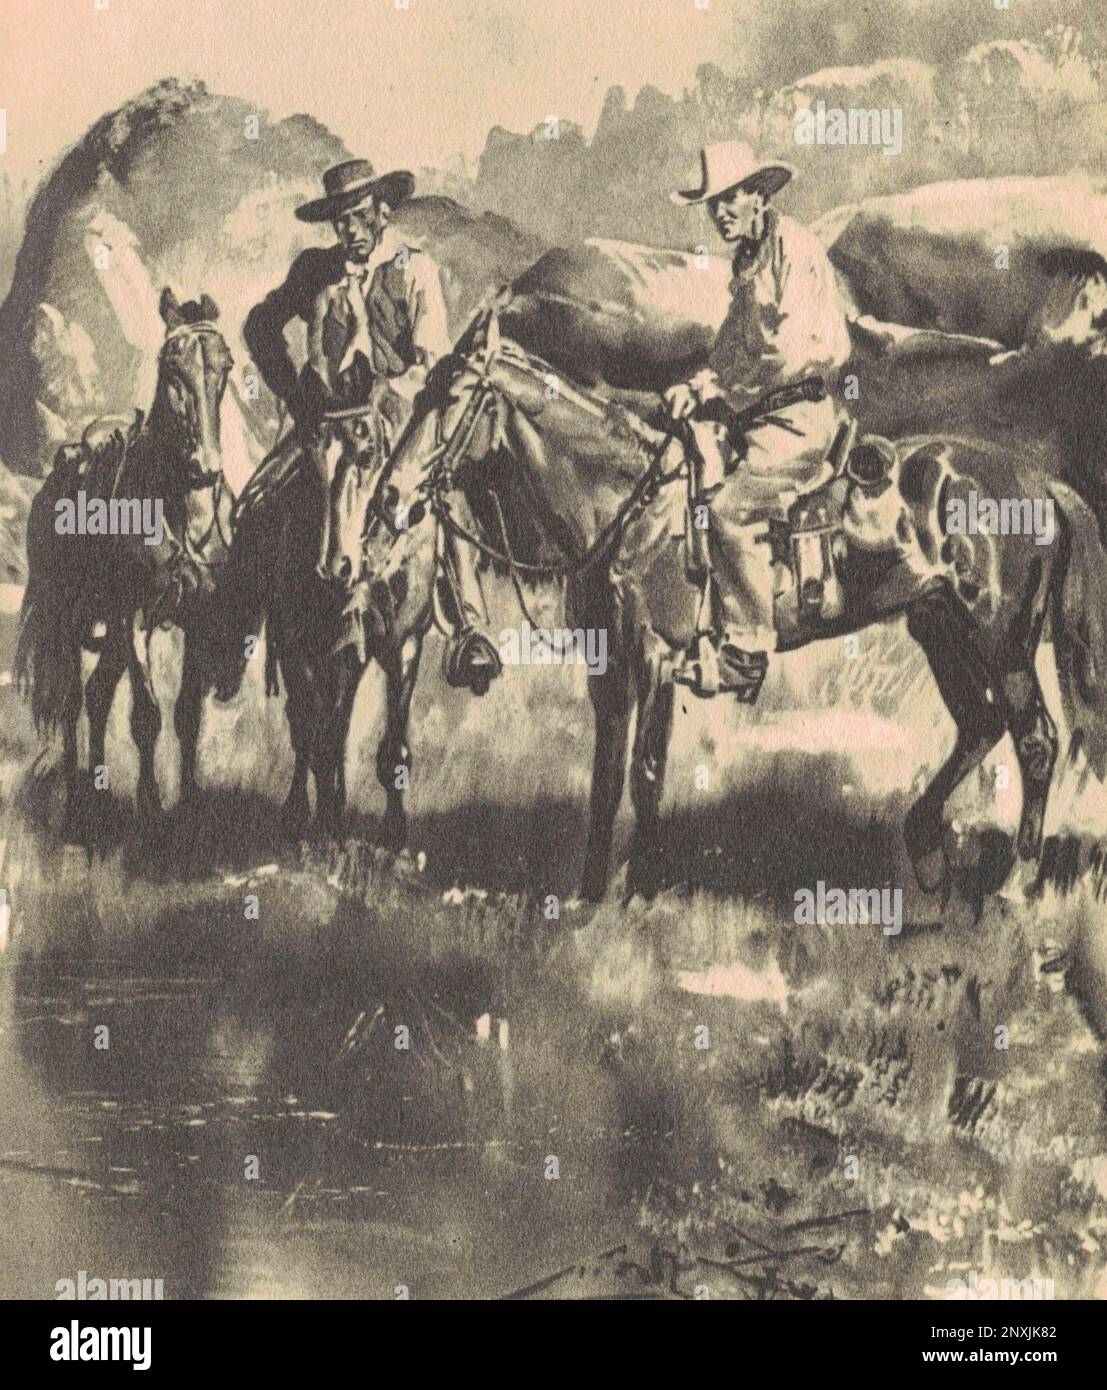 Black and white illustration shows cowboys on horseback by the river. Drawing shows life in the Old West. Vintage black and white picture shows adventure life in the previous century. Stock Photo